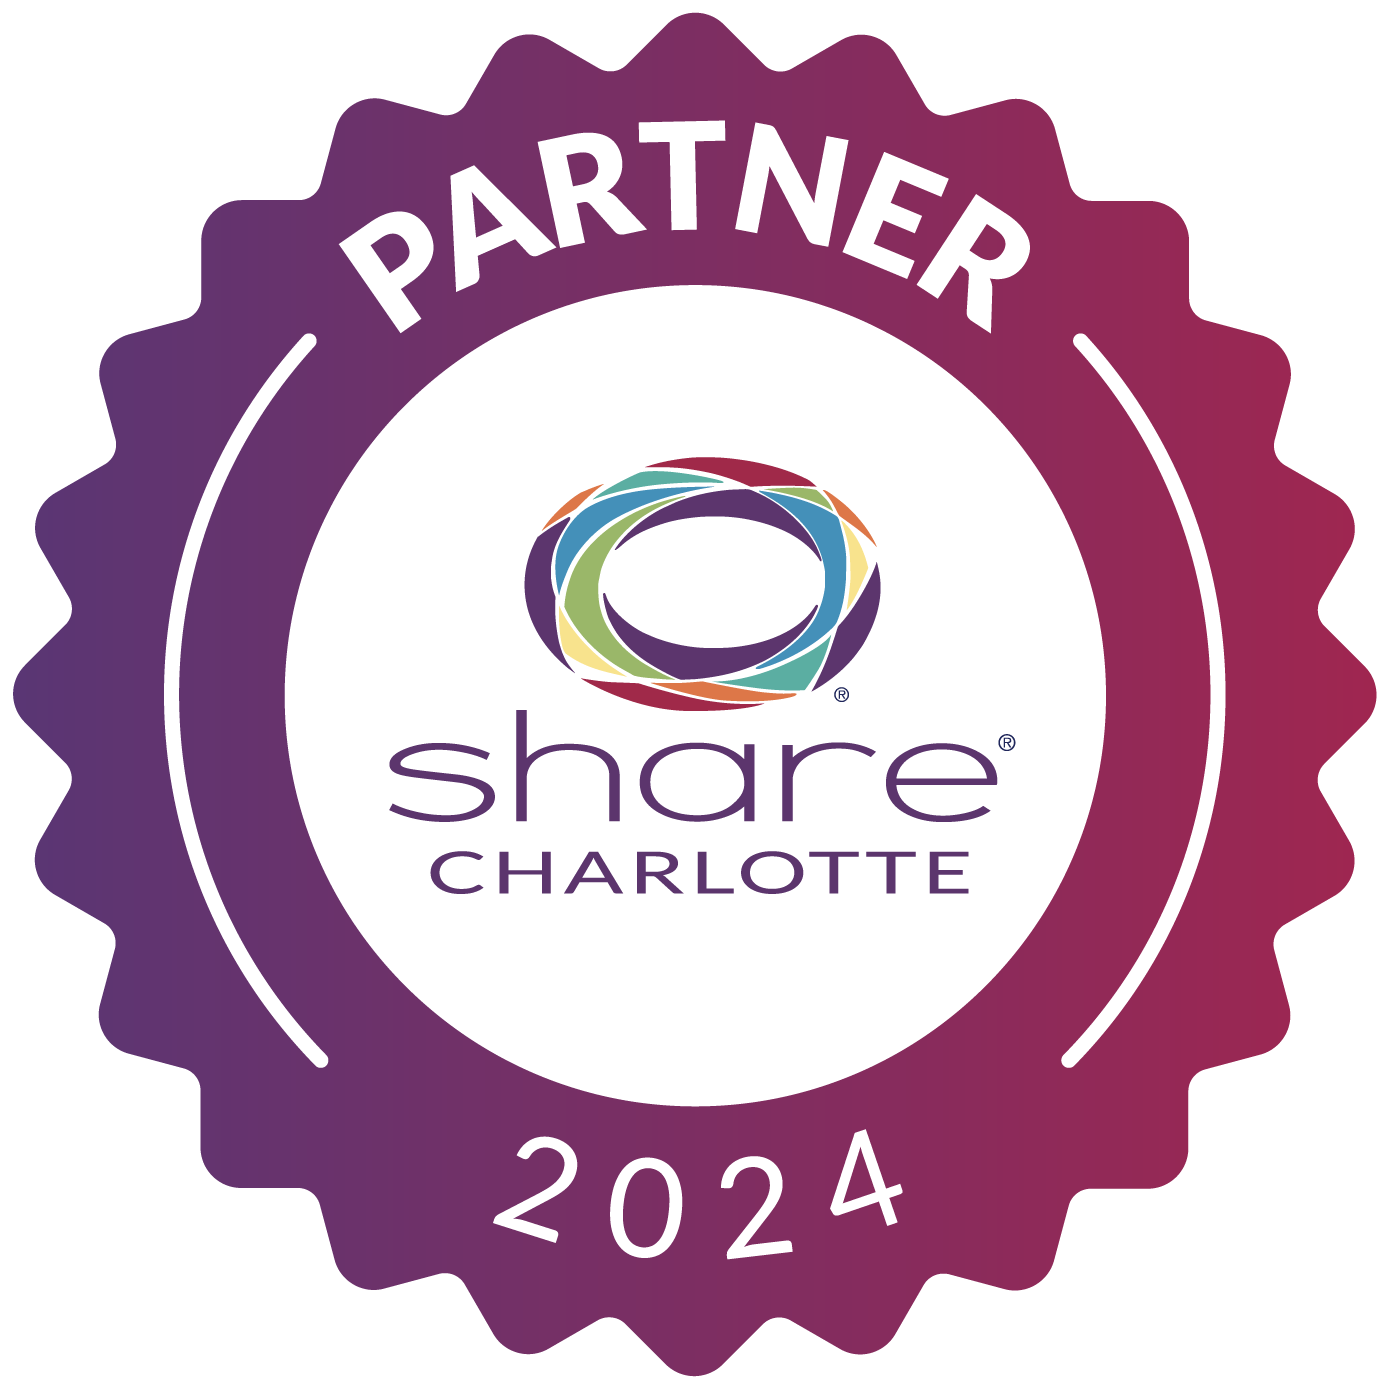 Share Charlotte Partner Seal Located in the Footer of page under Candid Platinum Transparency award.